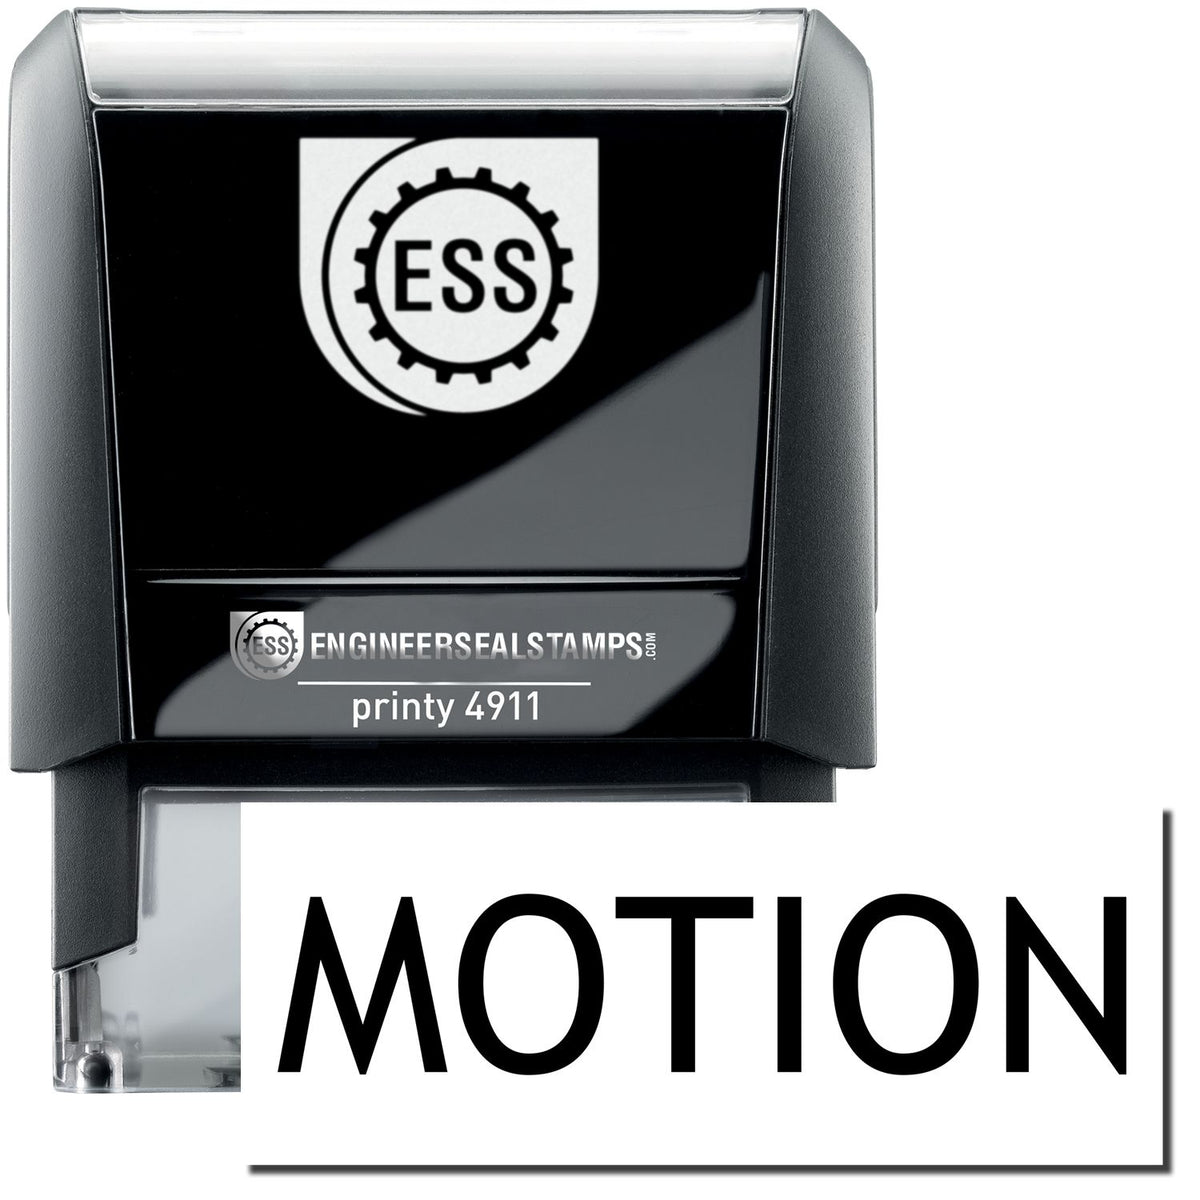 A self-inking stamp with a stamped image showing how the text &quot;MOTION&quot; is displayed after stamping.